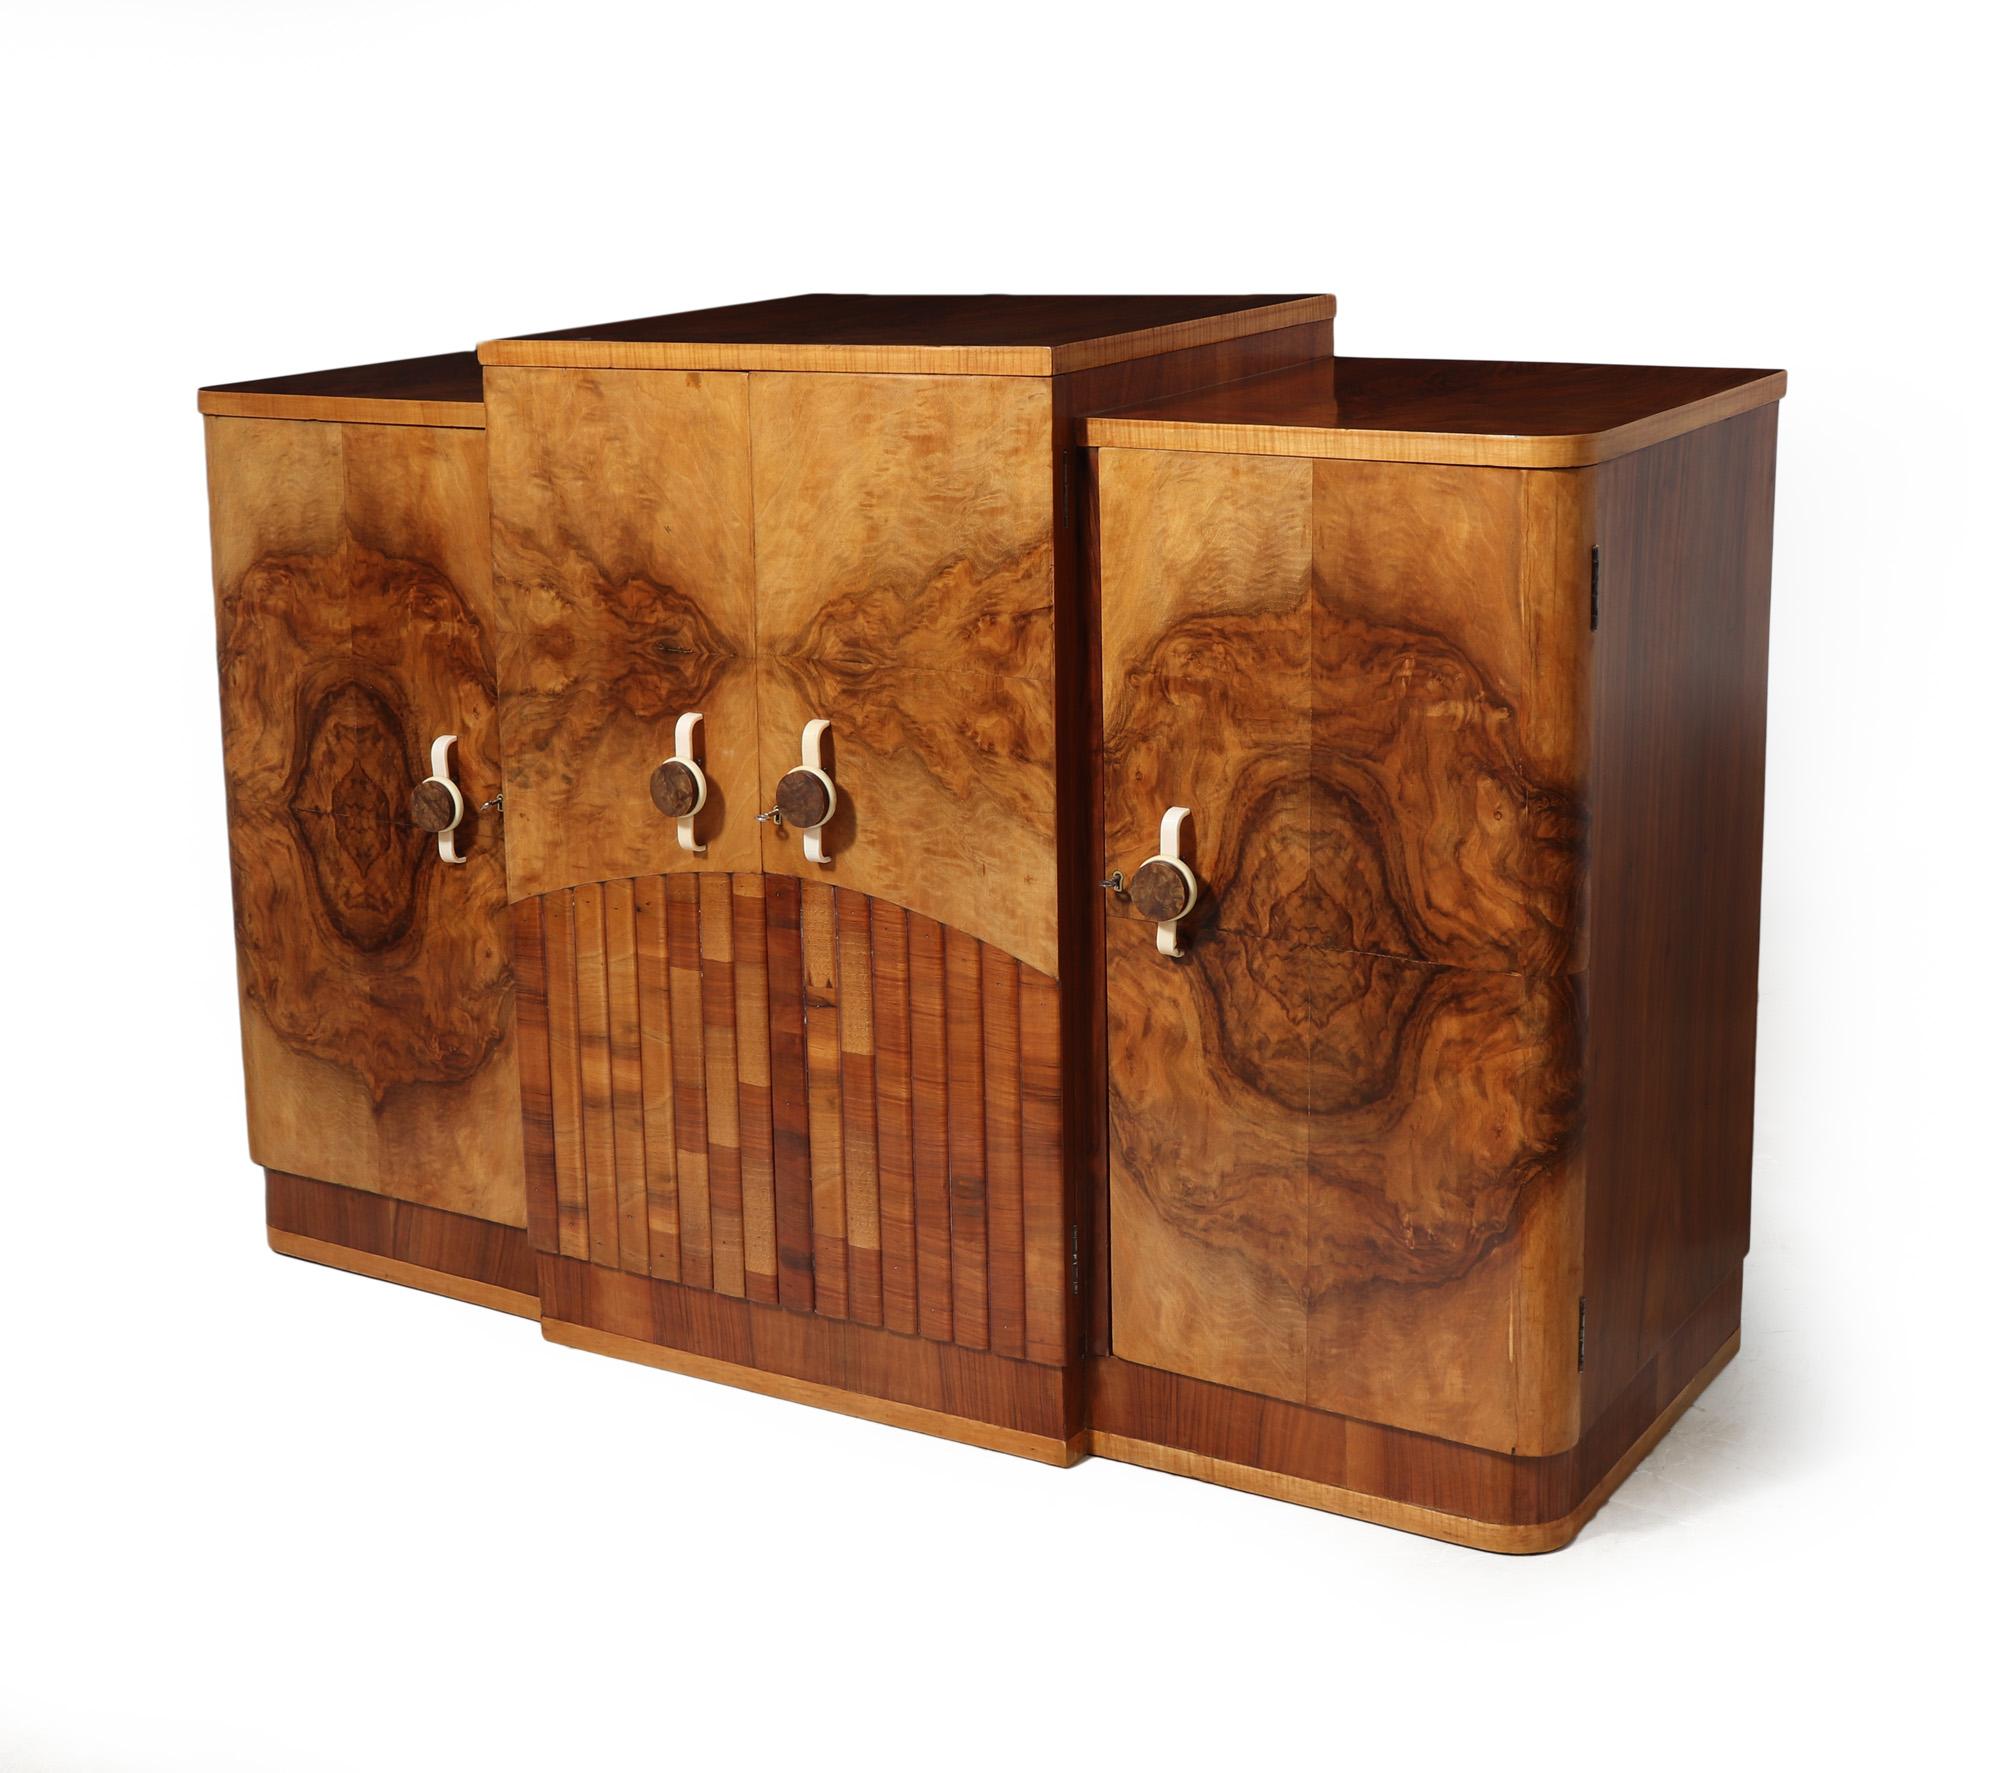 ART DECO WALNUT SIDEBOARD
Transport yourself back to the glamour of the 1930s with this stunning Art Deco sideboard from England! Crafted in luxurious figured walnut, this piece exudes elegance and sophistication. The reeding detail on the lower